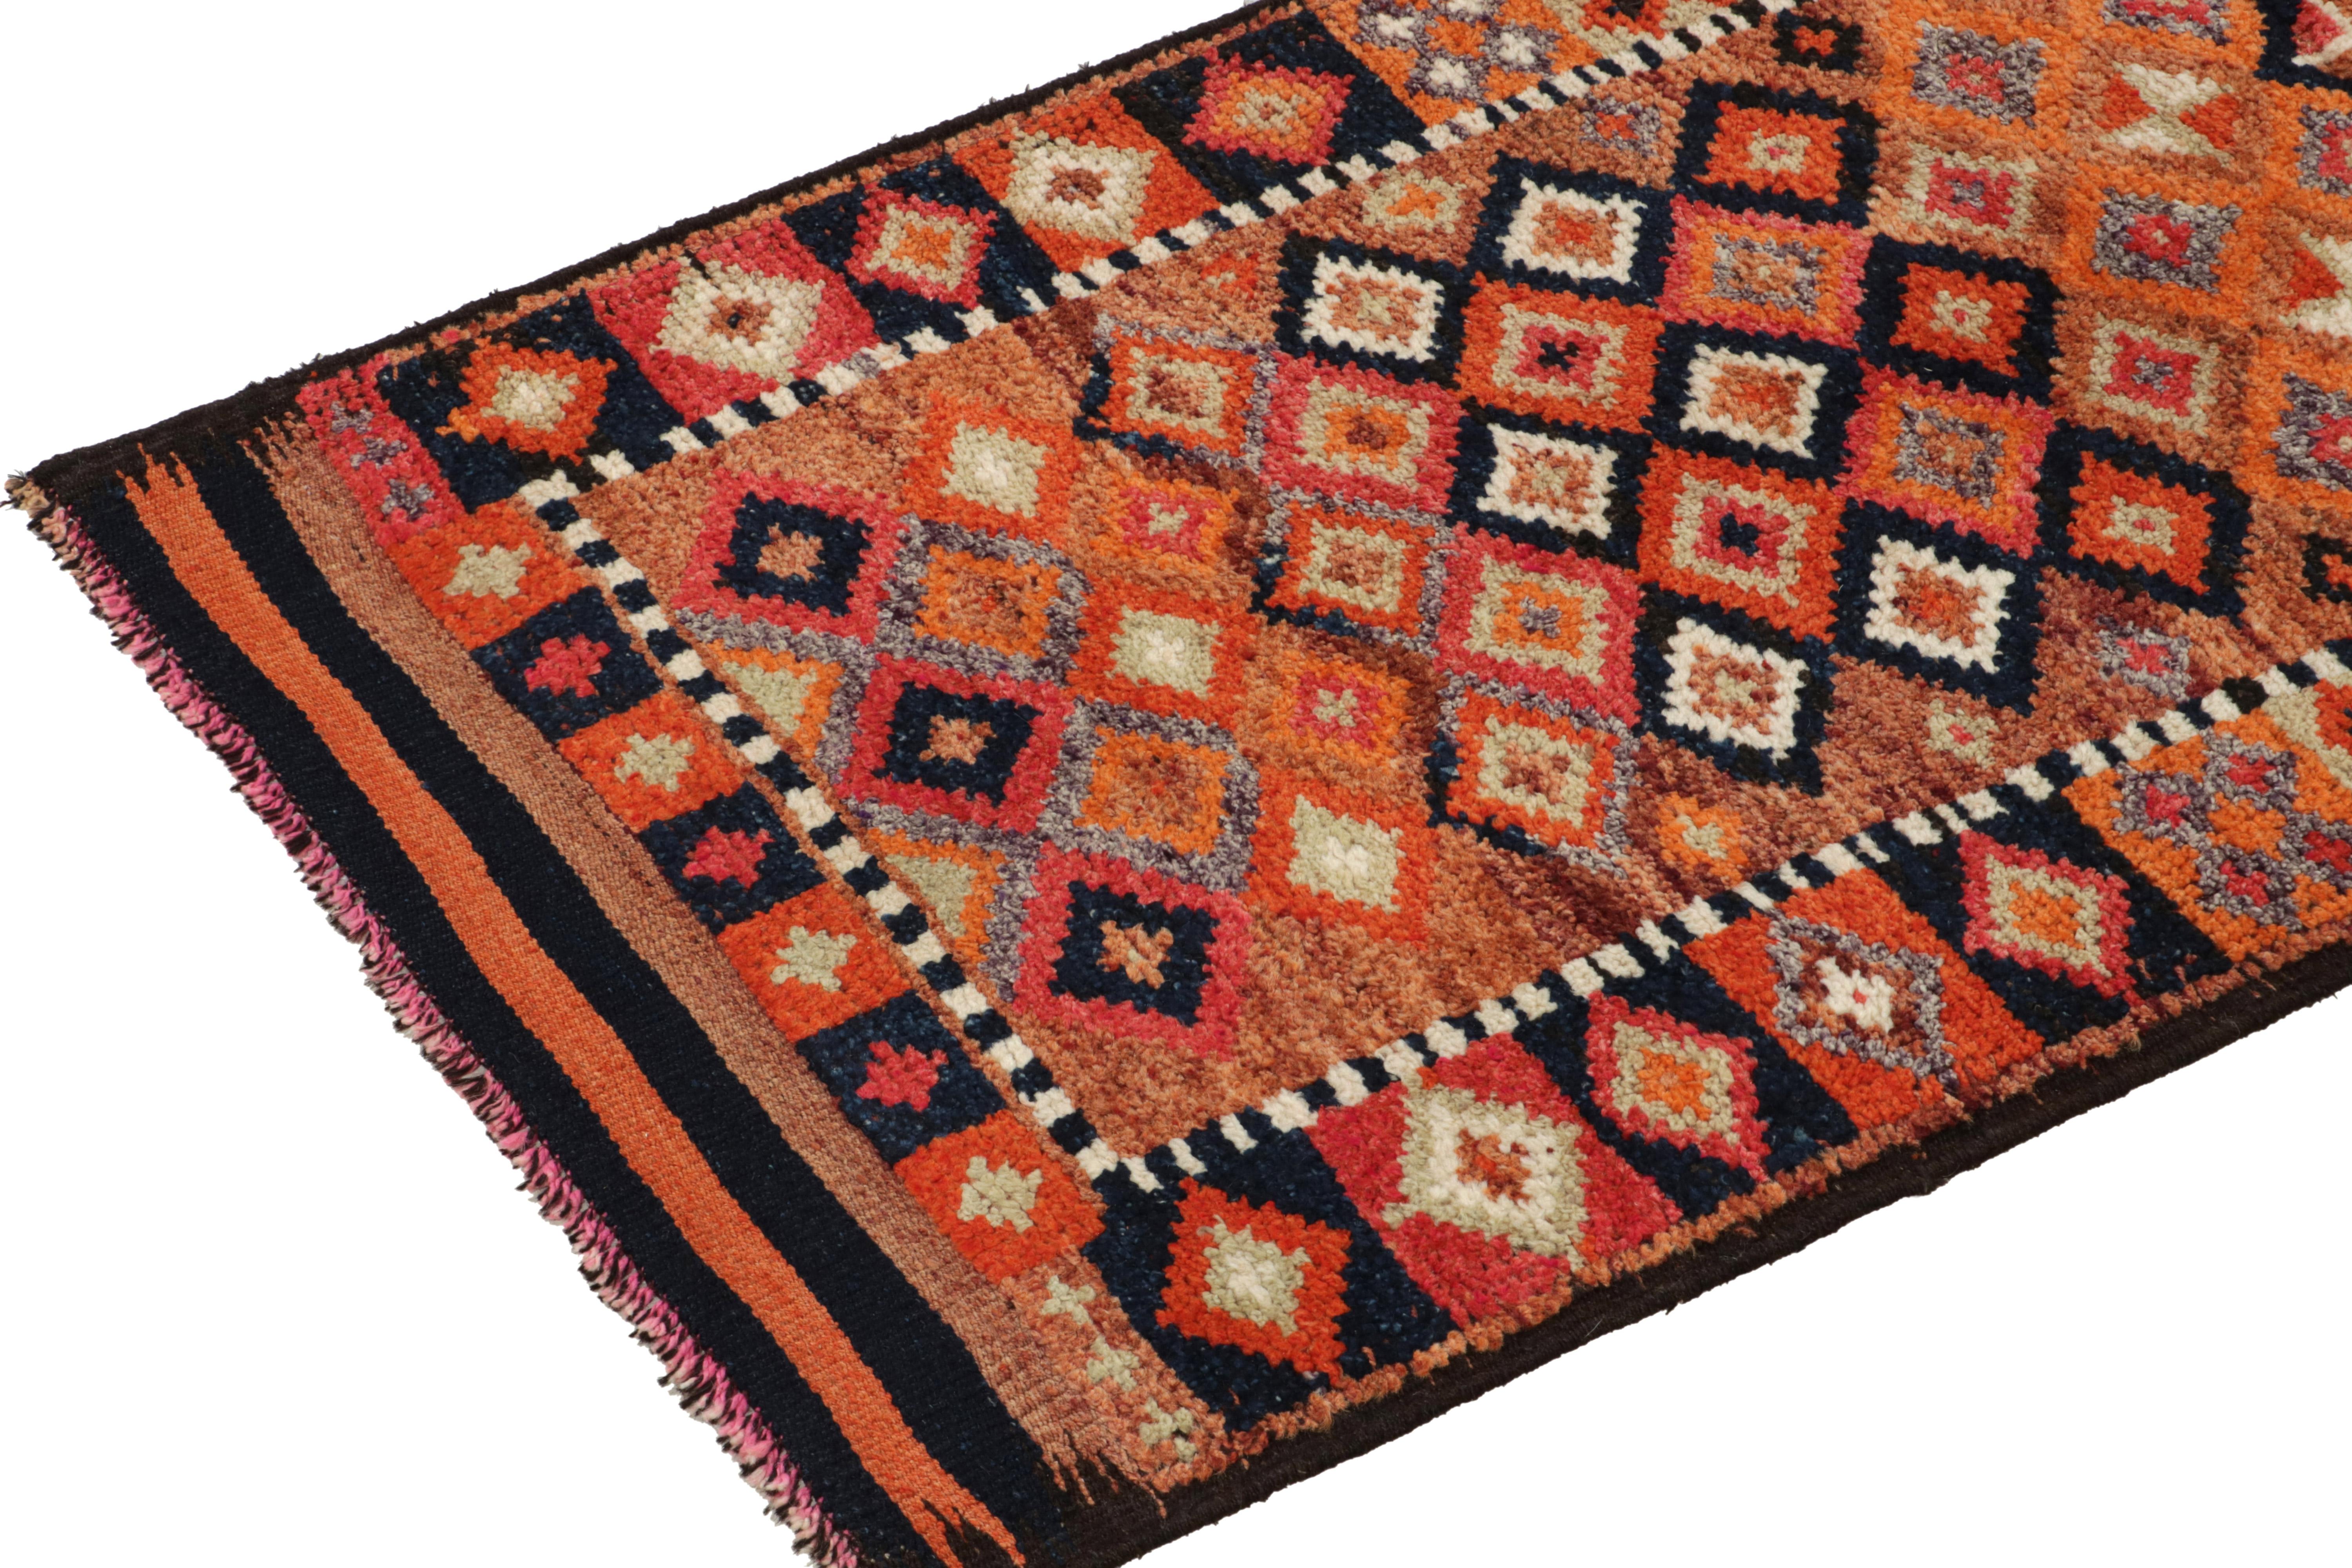 1950s Vintage Tribal Runner in Orange Multihued Geometric Pattern by Rug & Kilim In Good Condition For Sale In Long Island City, NY